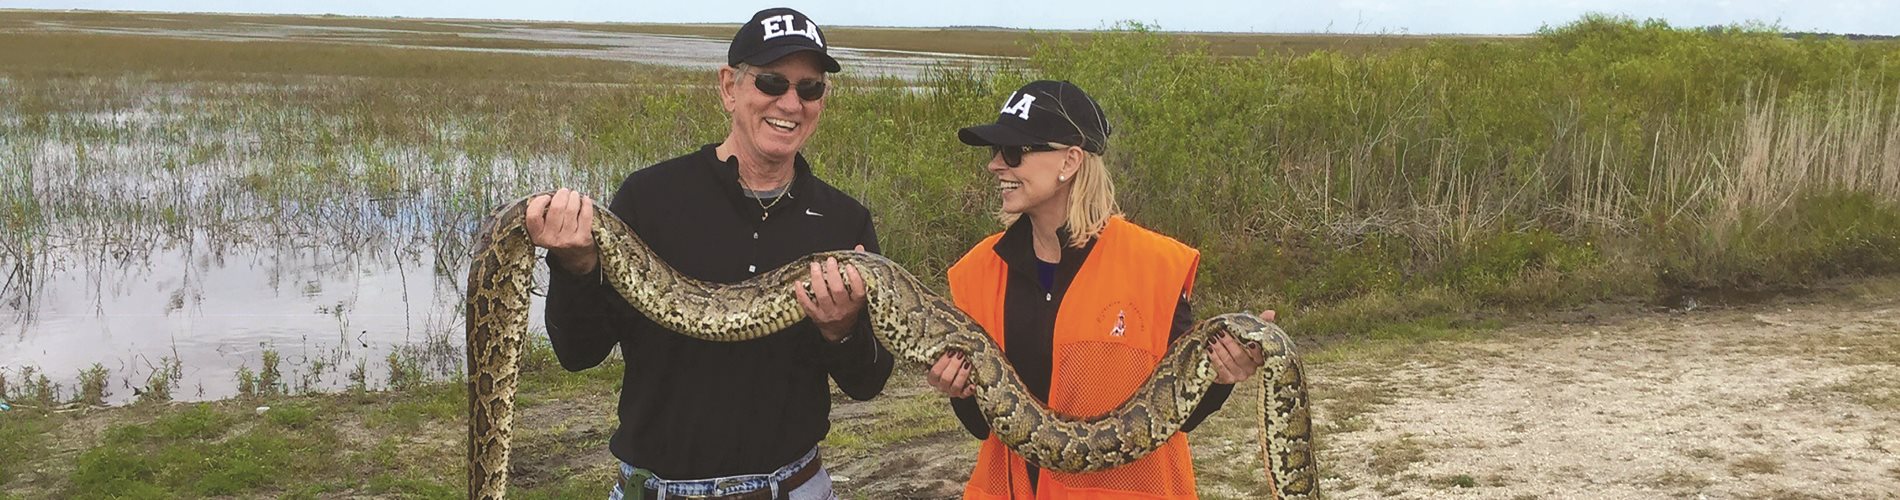 Geoff and Robbie Roepstorff have become passionate python hunters.